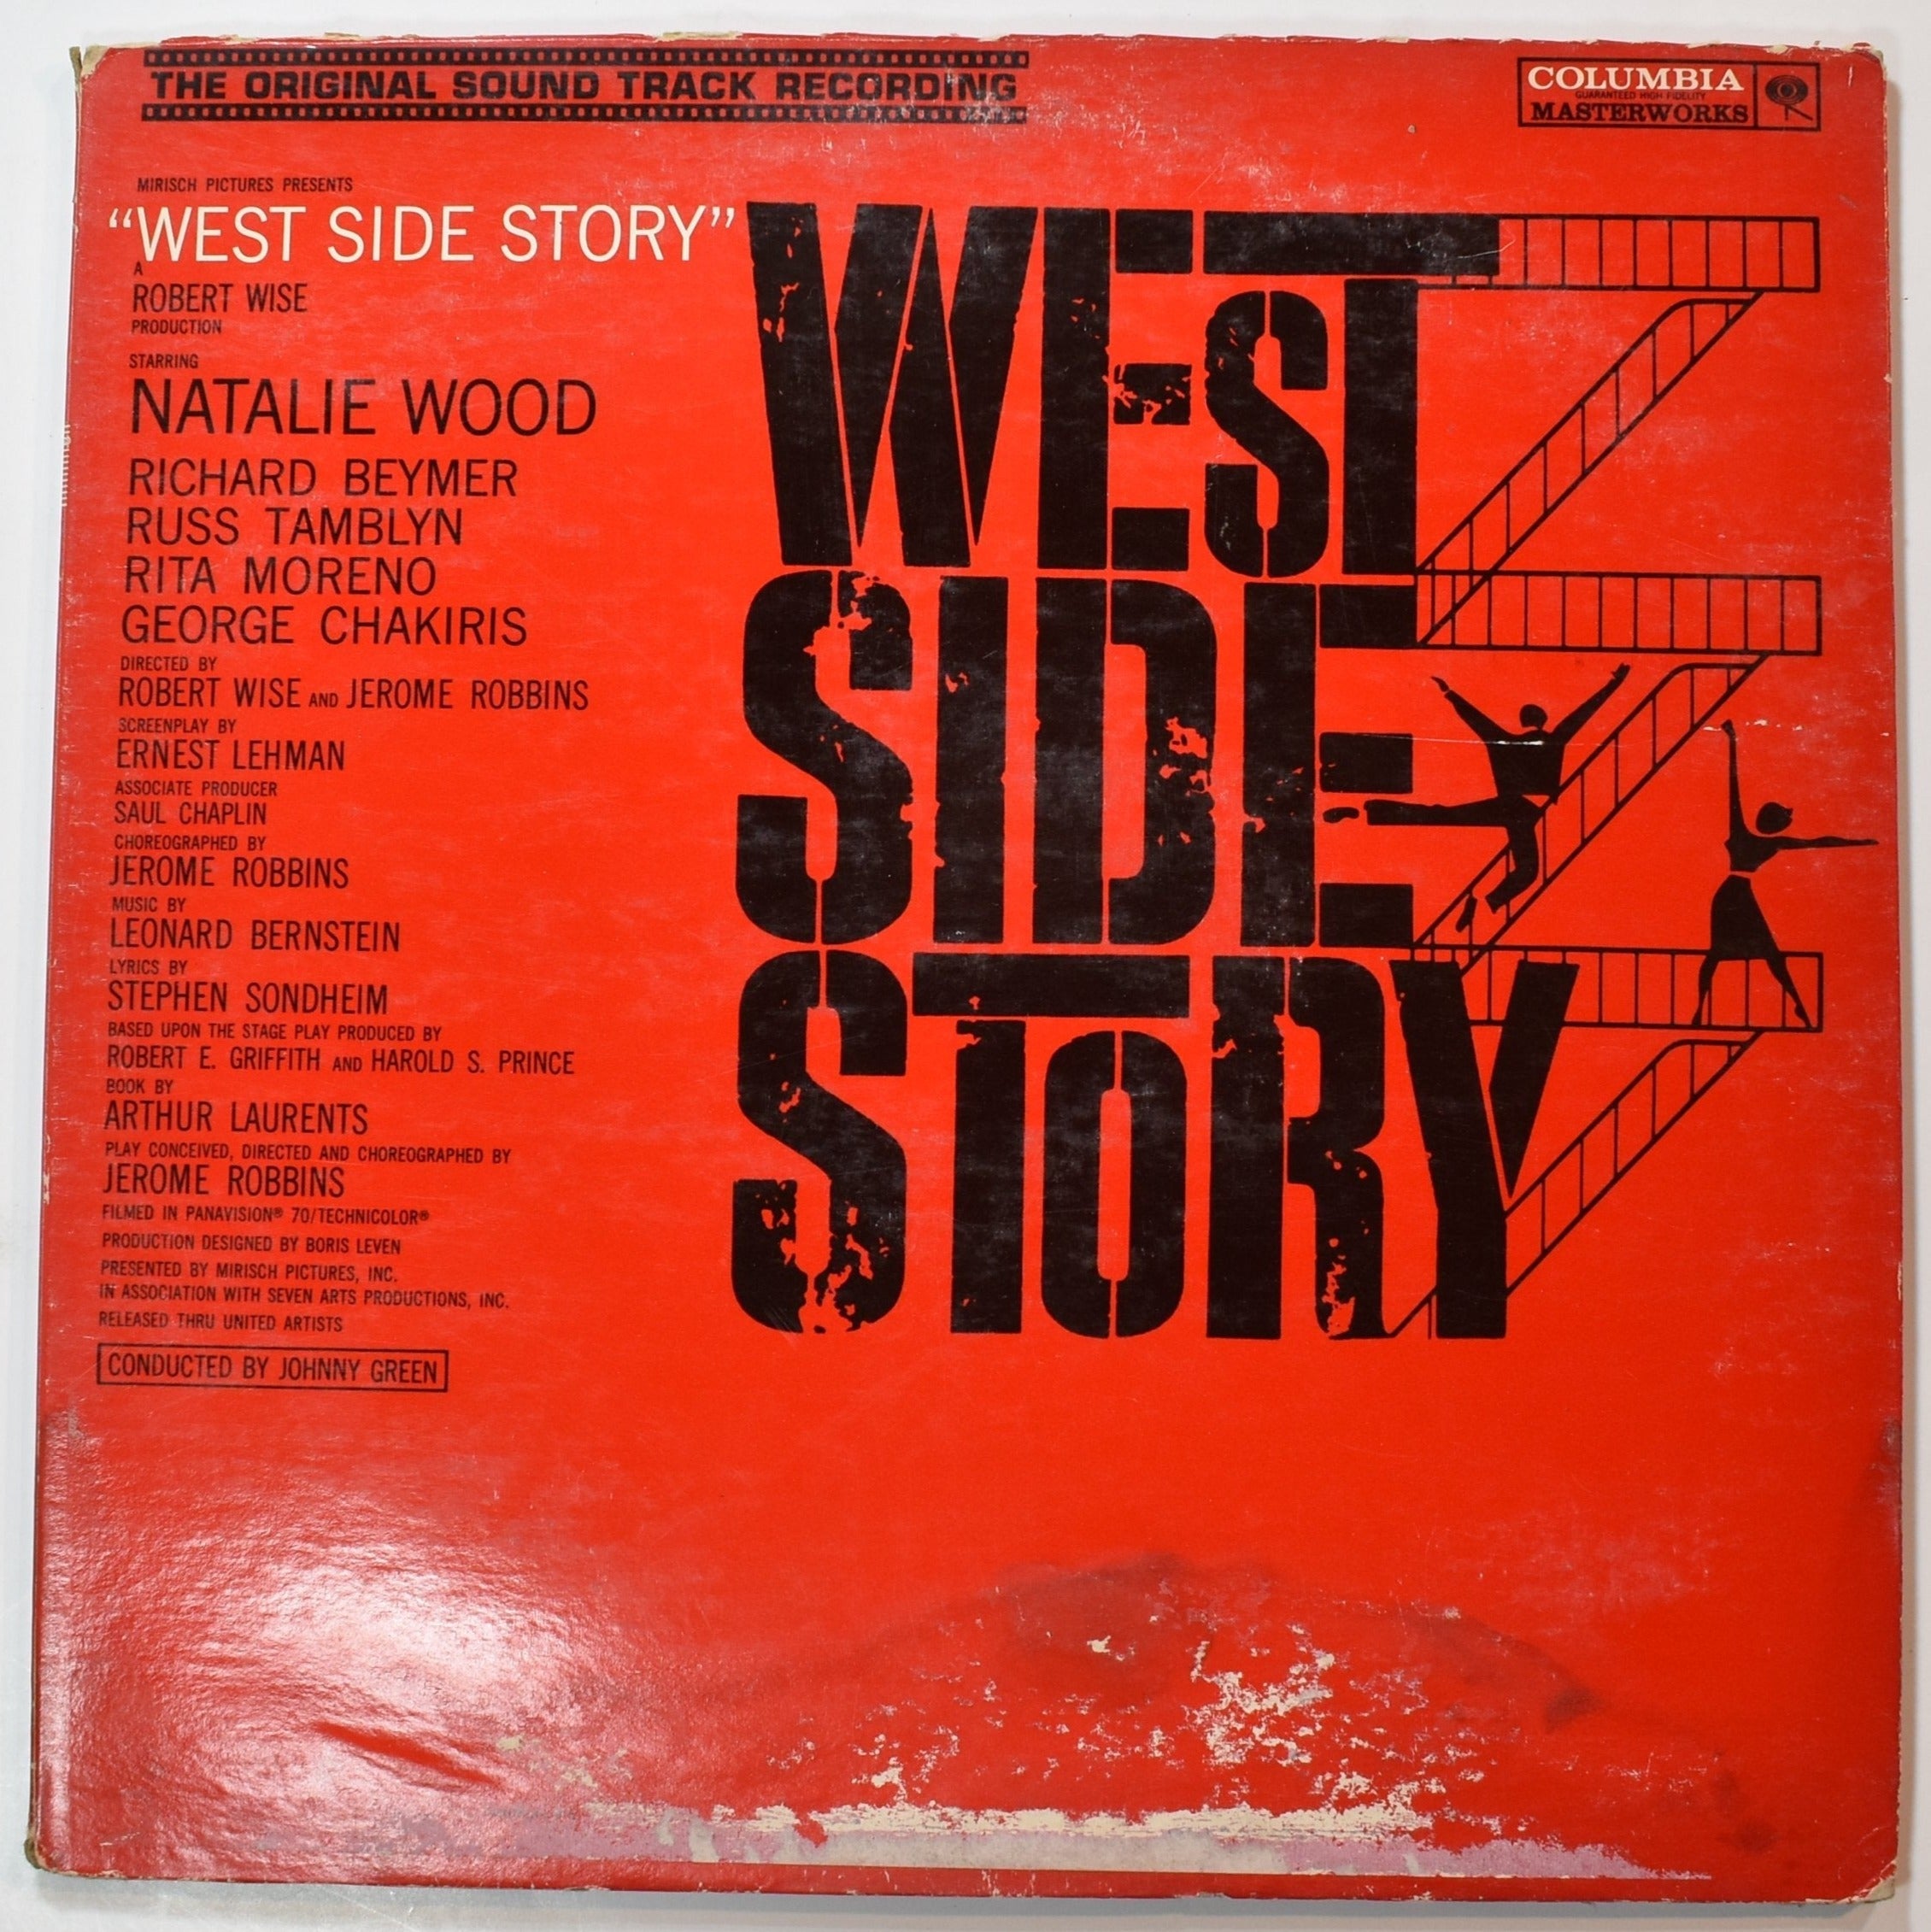 Vinyl Music Record West side story sound track record